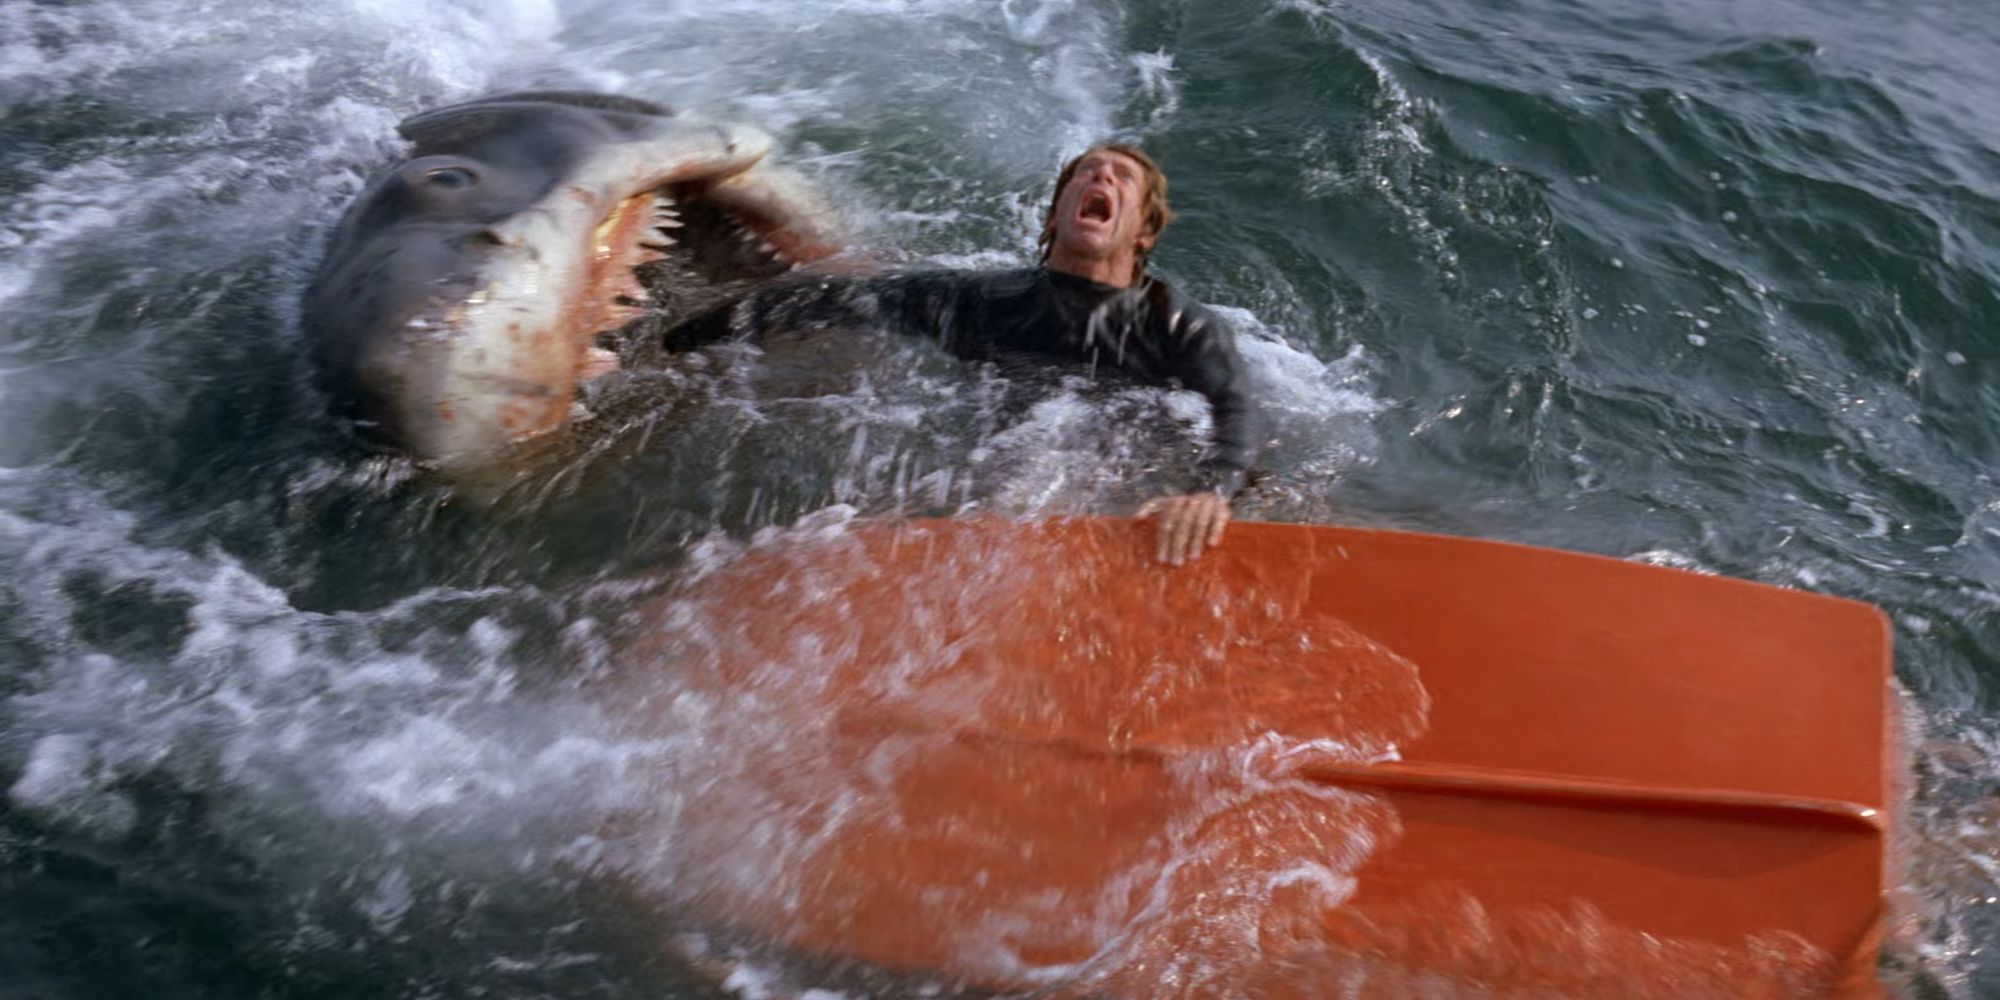 Rowboaters being attacked by the shark in Jaws